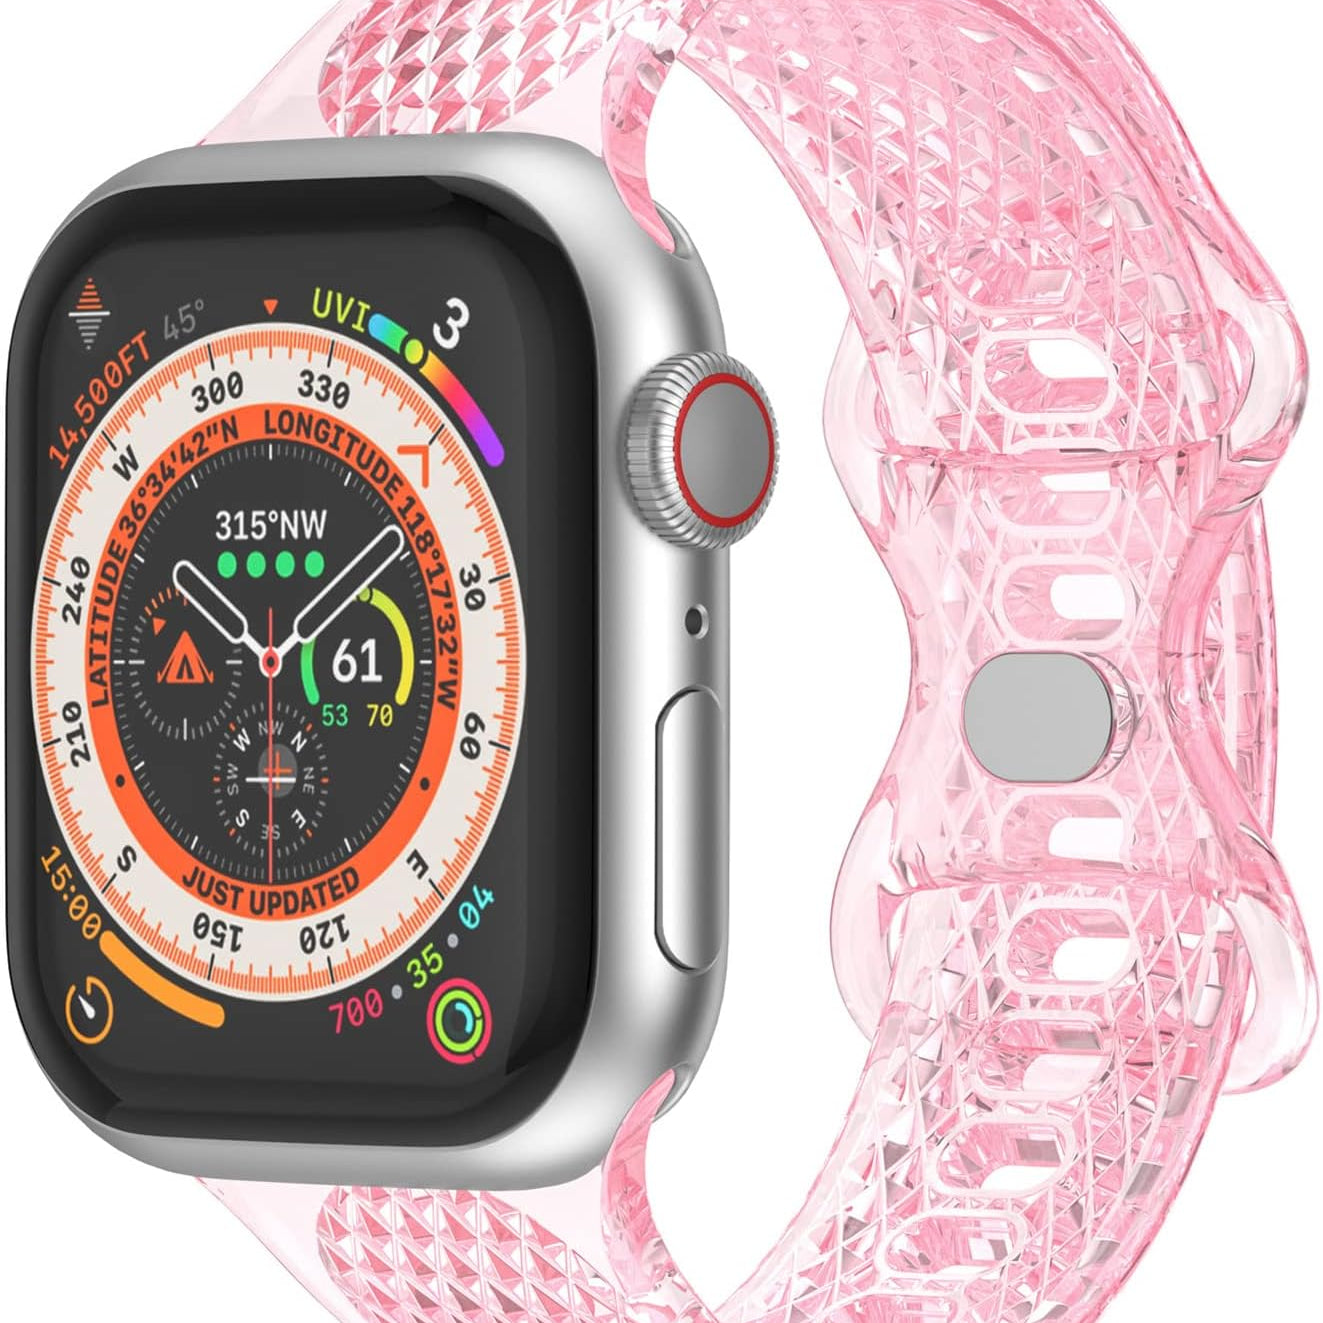 ClearGlide JellyGroove Silicone Sport Band For Apple Watch Multiple Colors Available